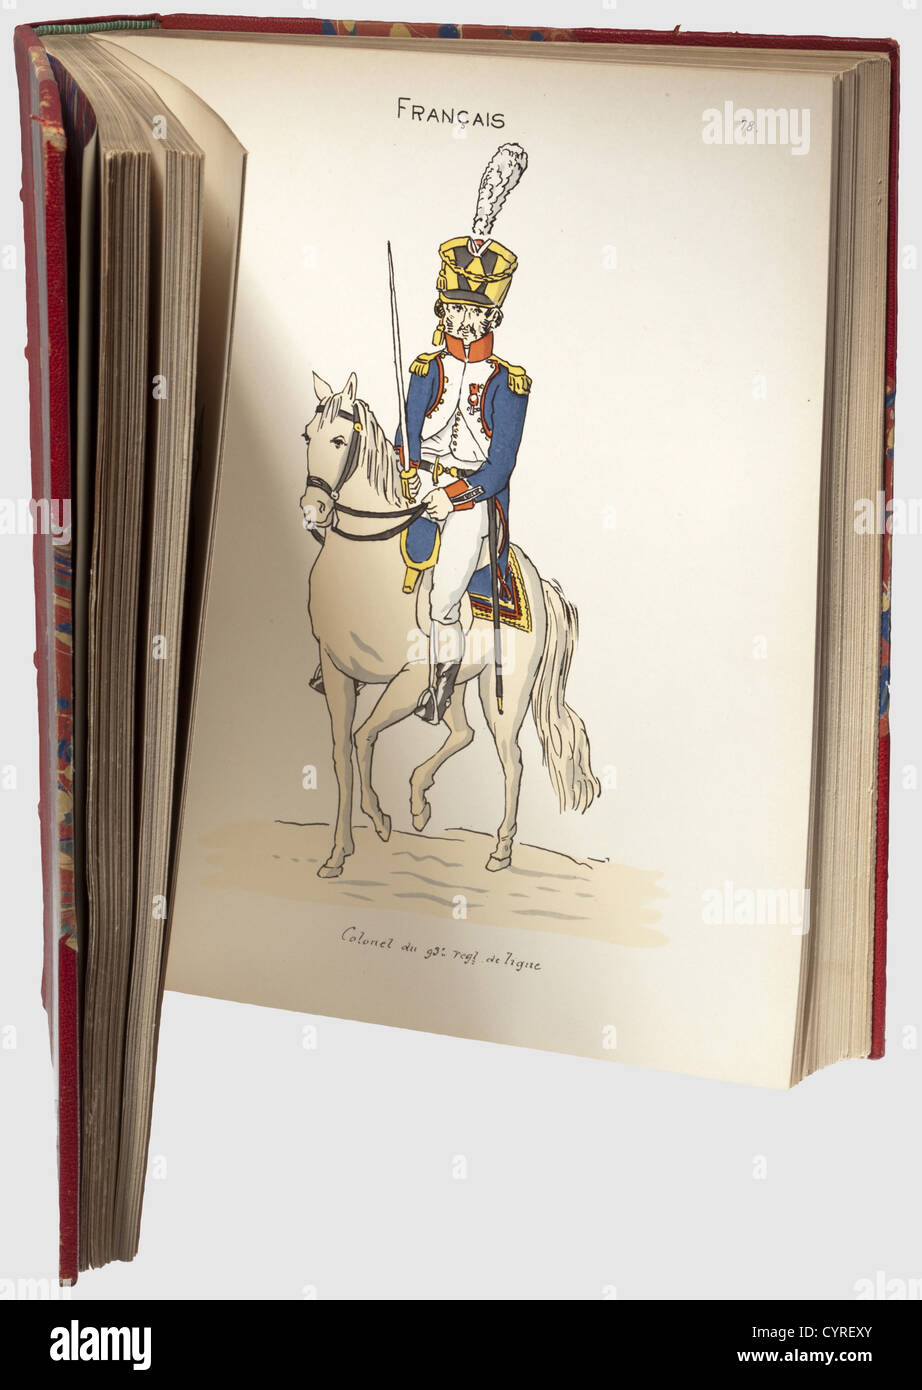 Album du Bourgeois de Hambourg 1806 - 1818,Paris,1902.Large format volume with 158 coloured,unsophisticated portrayals of French soldiers who participated in the occupation of Hamburg.('Représentation de Uniformes de toutes les troupes qui ont été casernées à Hambourg,de l'année 1806 à l'année 1815' / Representation of the uniforms of all the units which were quartered at Hamburg,from 1806 to 1815').Number 140 of 150 volumes printed.Gold-stamped half leather binding with golden top cut,somewhat dented on the edges.Dimensions ca.33 x 27 cm,historic,,Additional-Rights-Clearences-Not Available Stock Photo